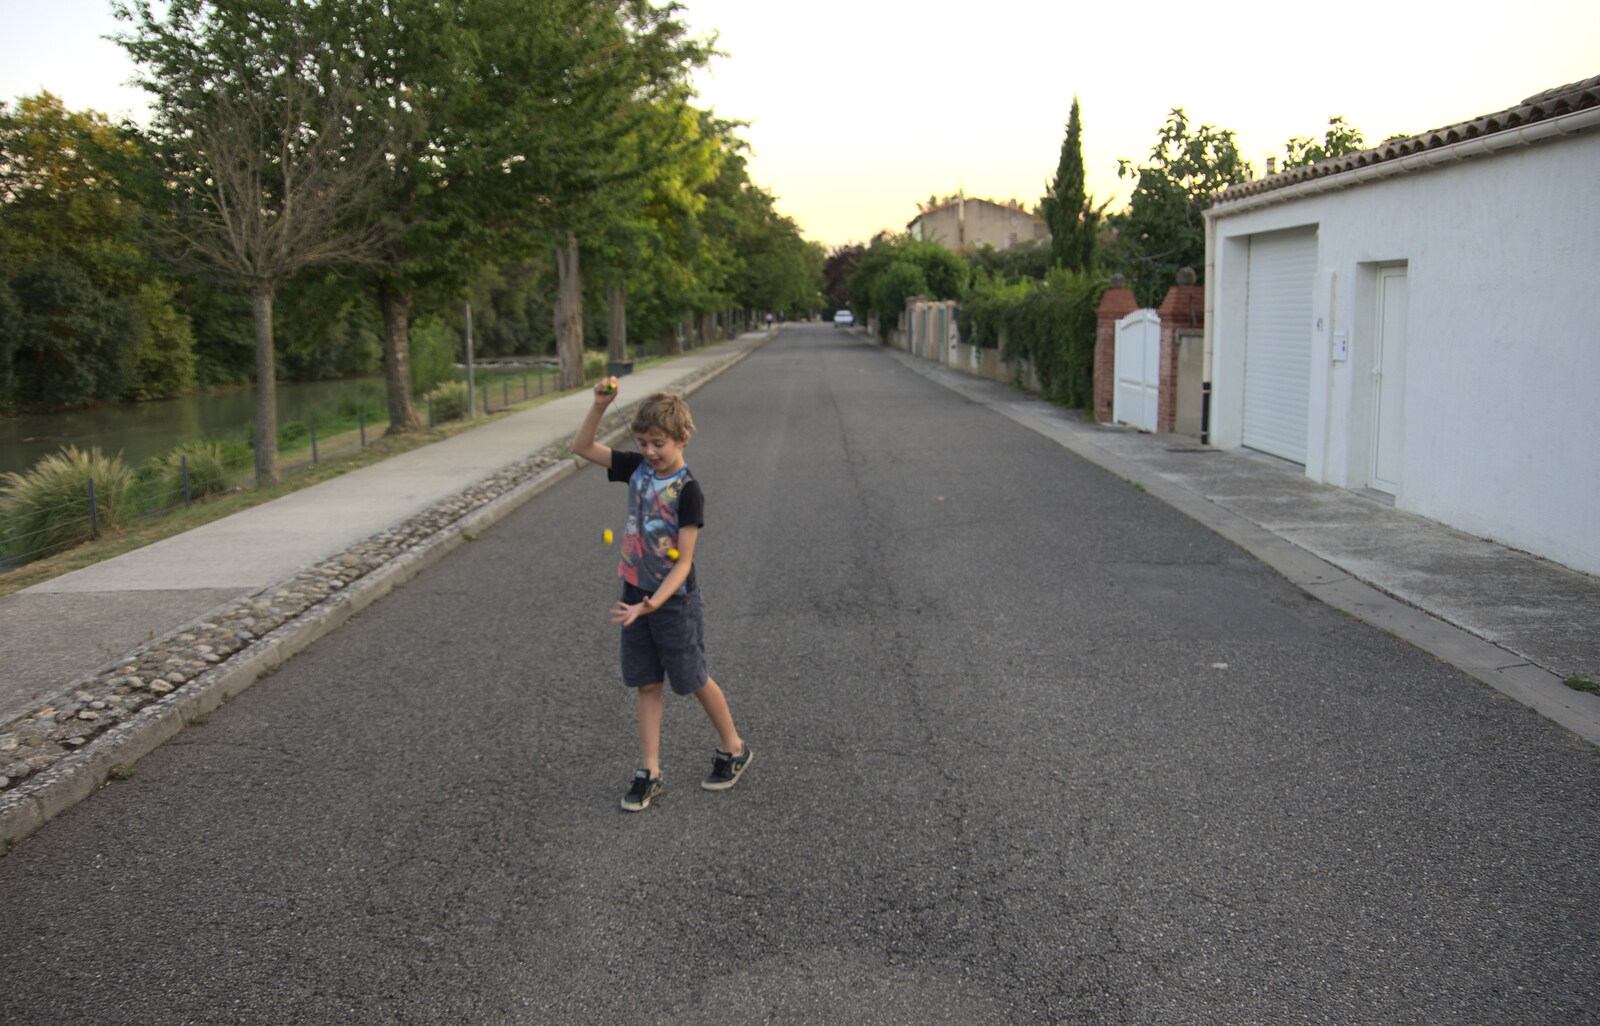 Fred does his astro jacks out in the street from Le Gouffre Géant and Grotte de Limousis, Petanque and a Lightning Storm, Languedoc, France - 12th August 2018